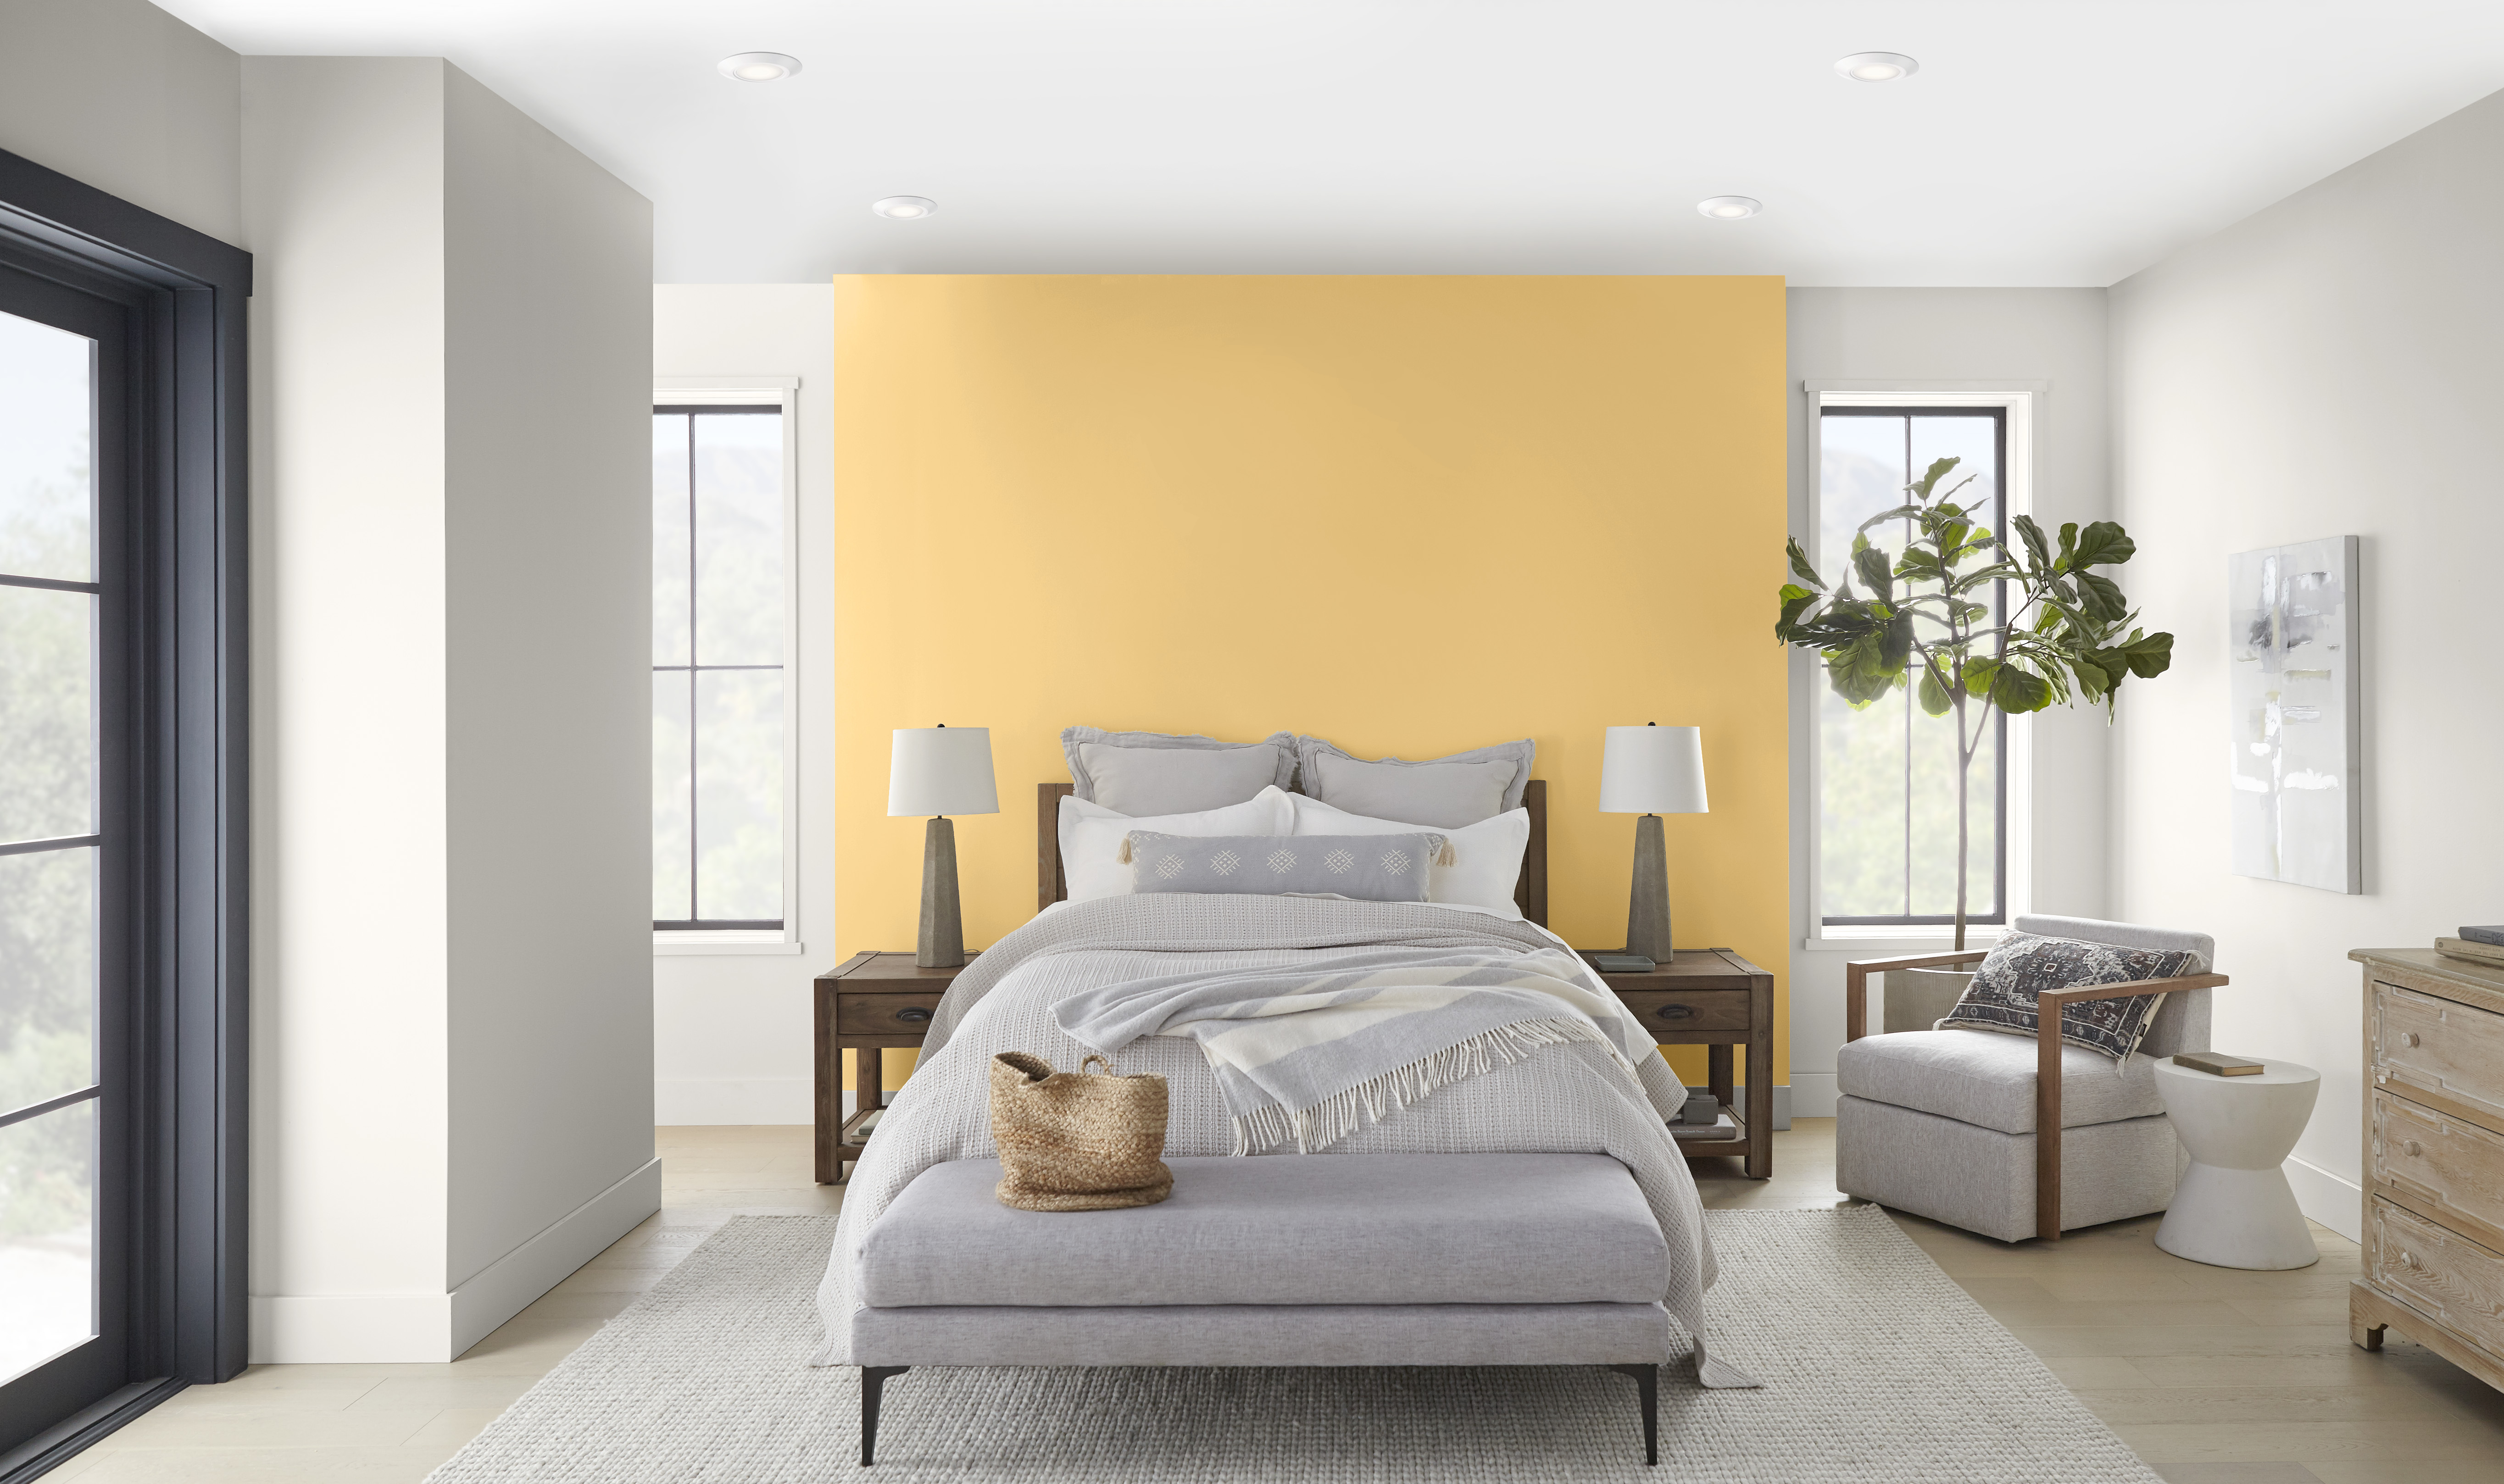 A light-filled bedroom with the bed headboard wall painted in a bright mustard colour